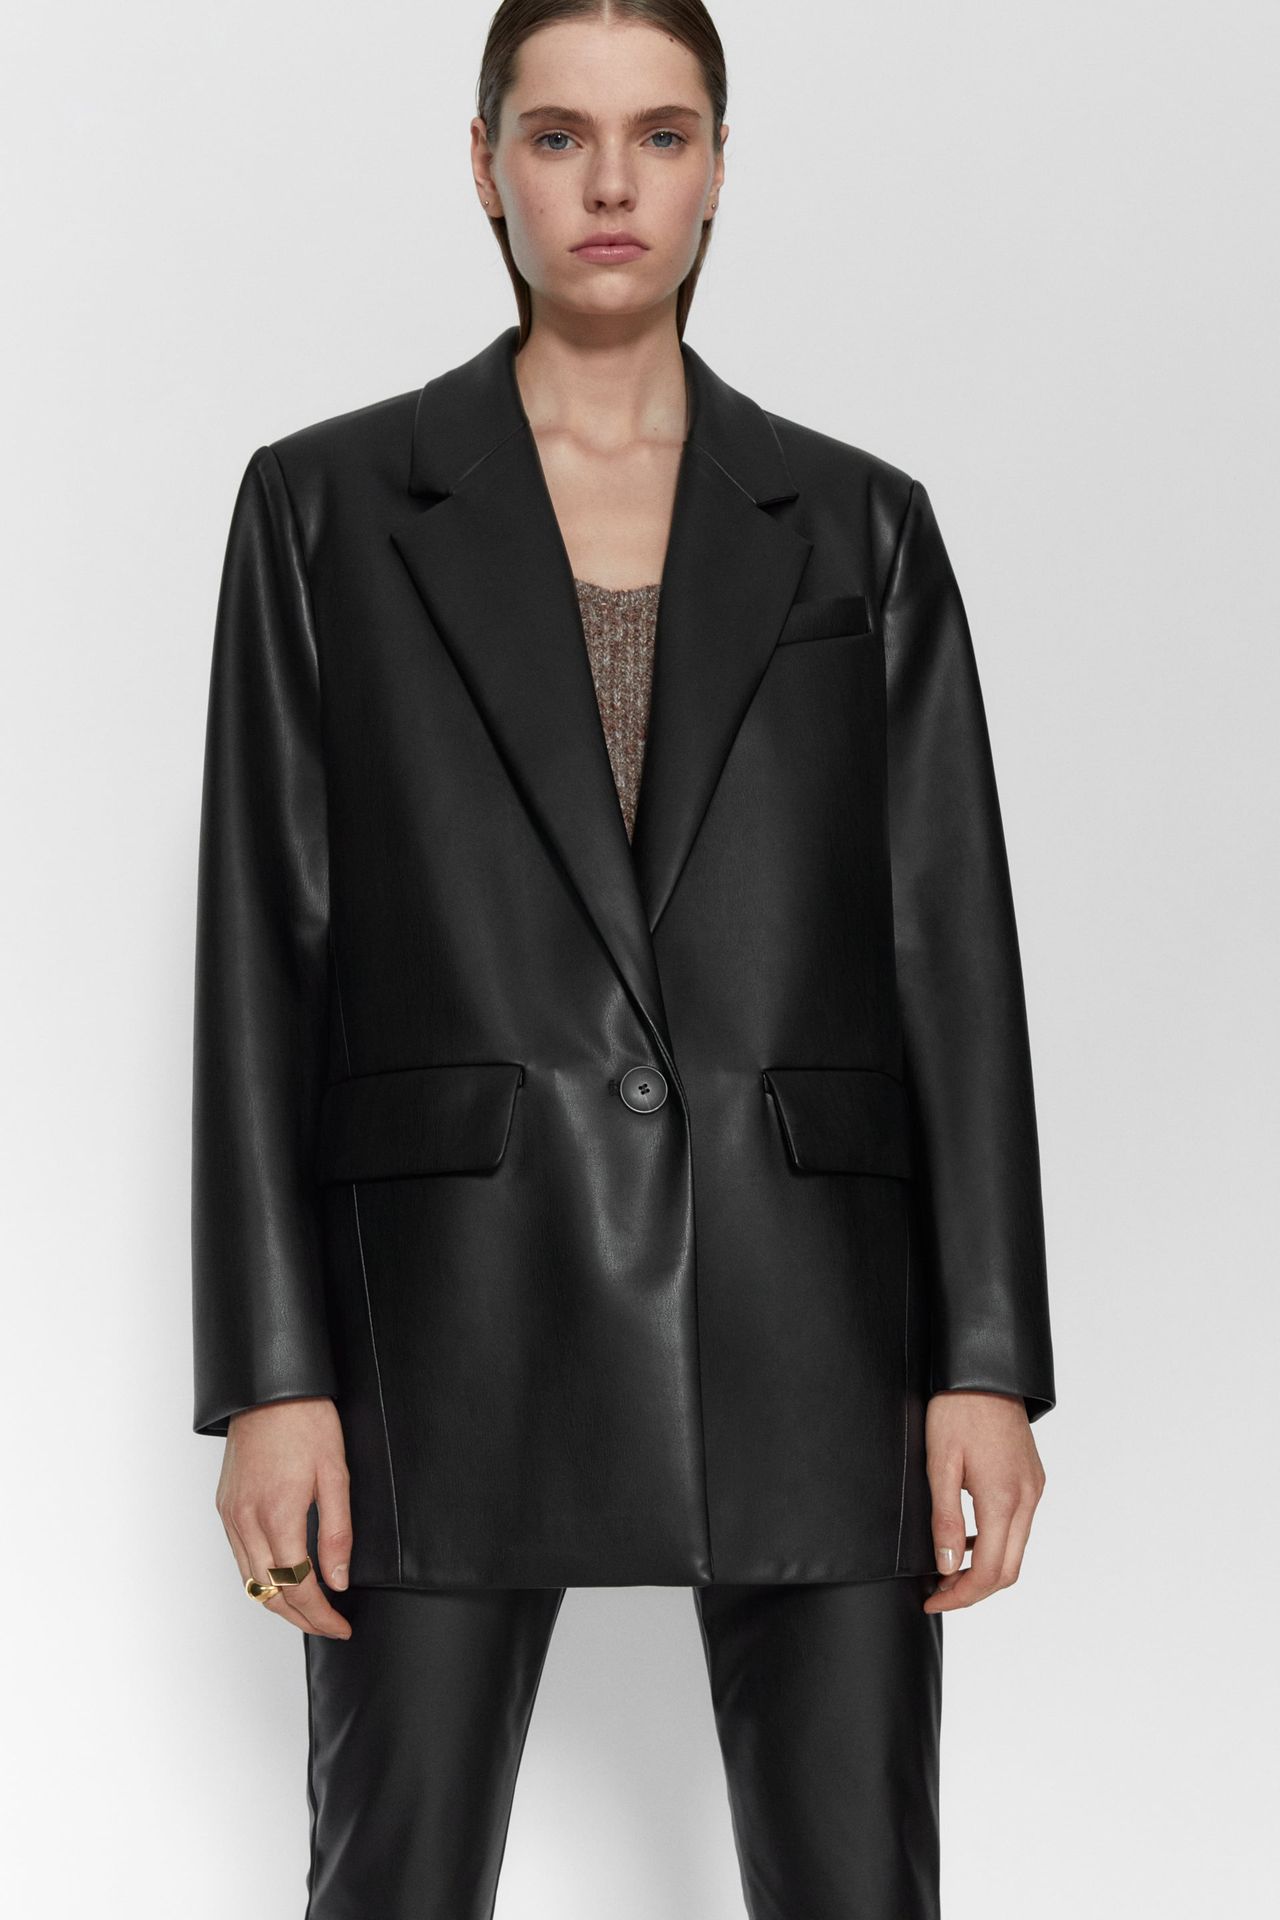 These Are the Best Winter Pieces at Zara Right Now | Who What Wear